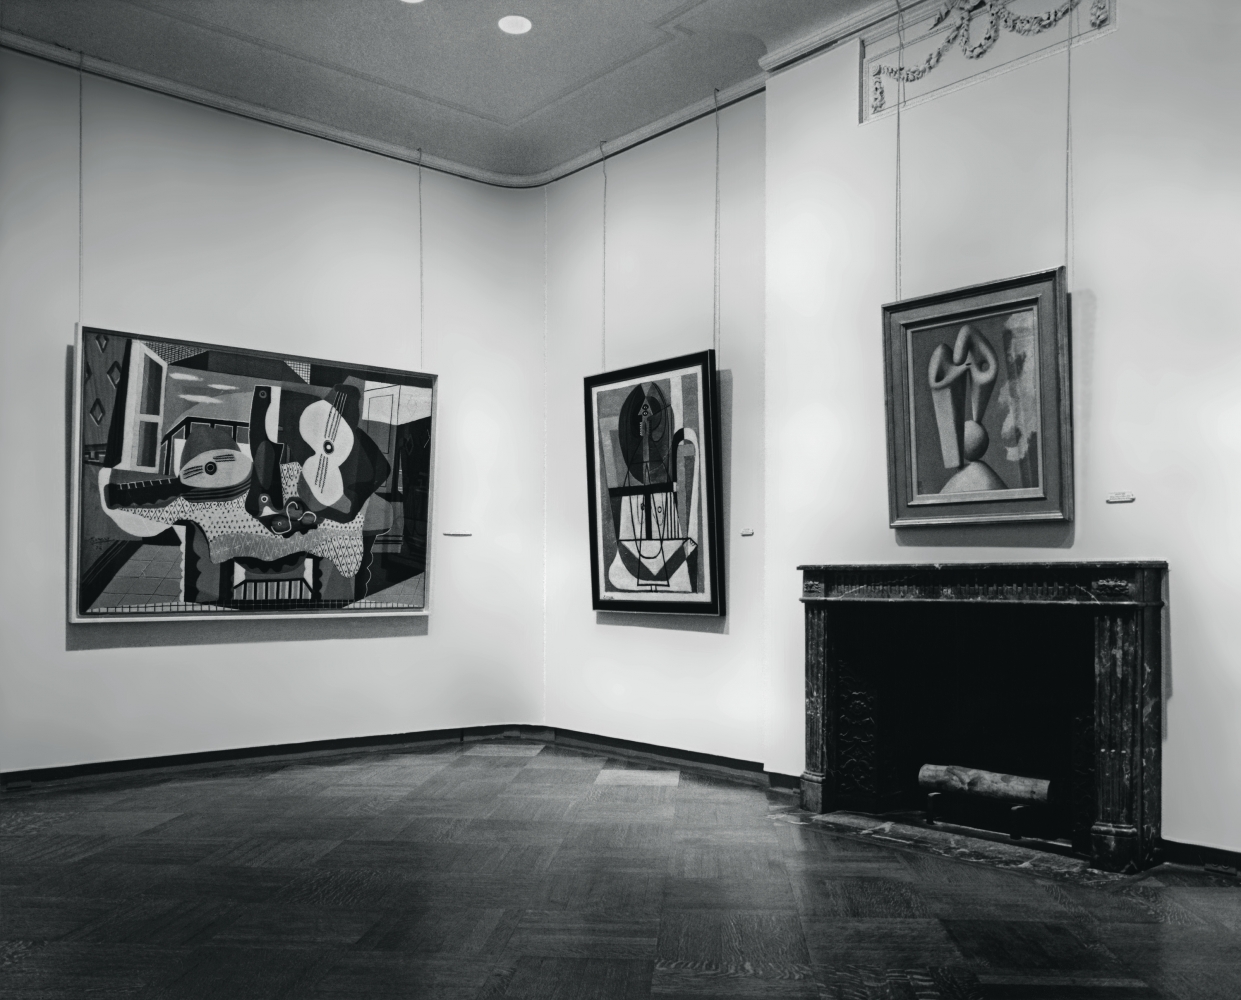 Installation view of&nbsp;Pablo Picasso&nbsp;exhibition, spring 1975.&nbsp;, Art&nbsp;&copy; 2021 Estate of Pablo Picasso / Artists Rights Society (ARS), New York.